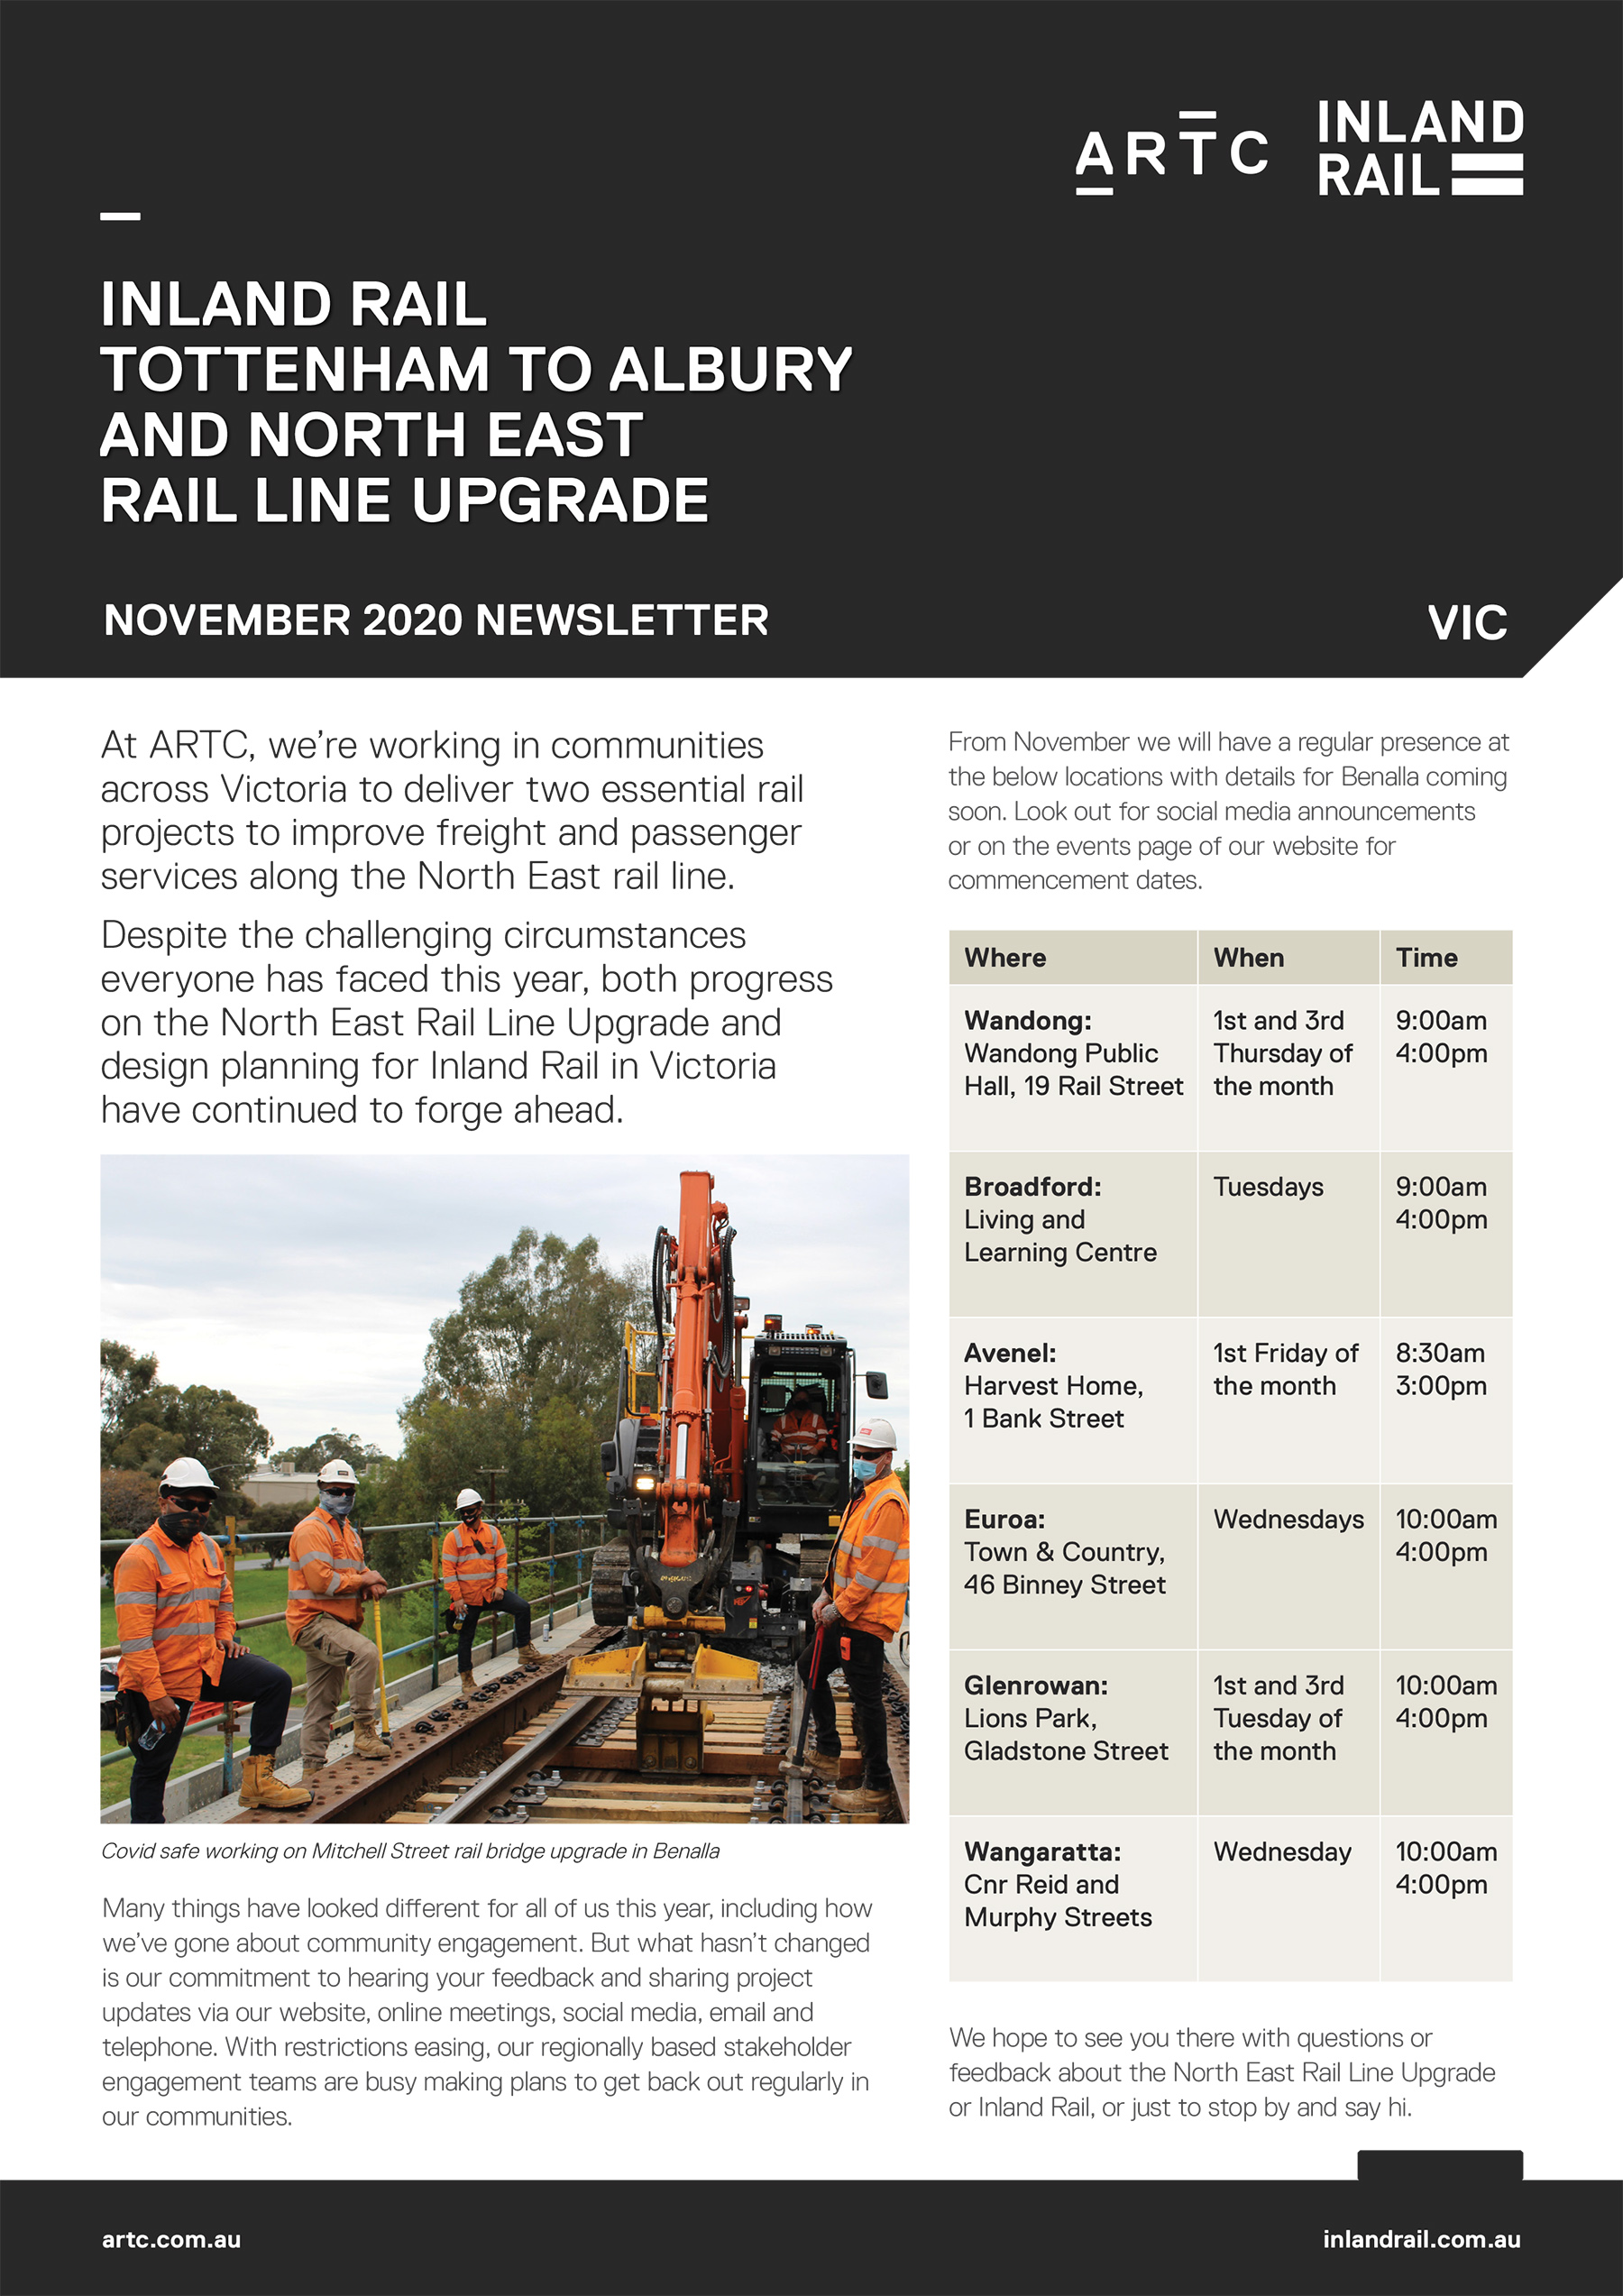 November 2020 project update for Tottenham to Albury